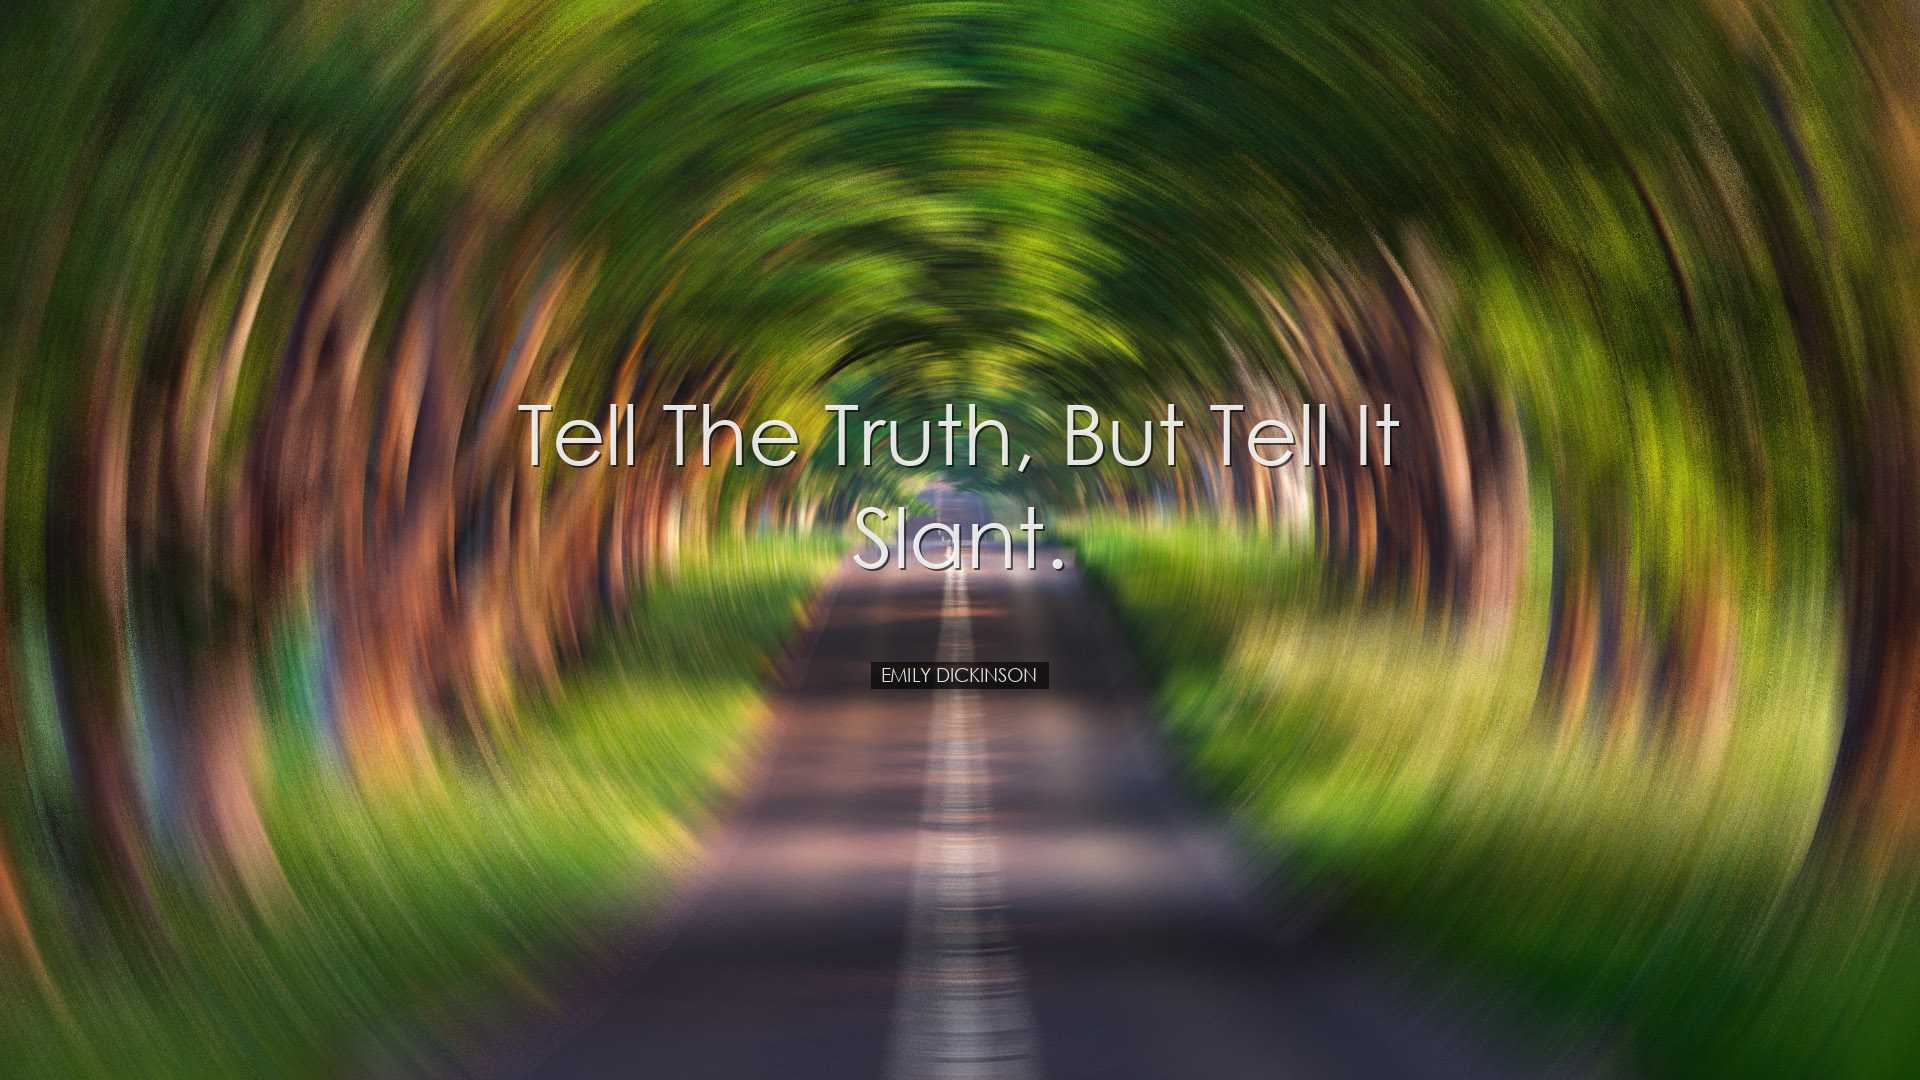 Tell the truth, but tell it slant. - Emily Dickinson